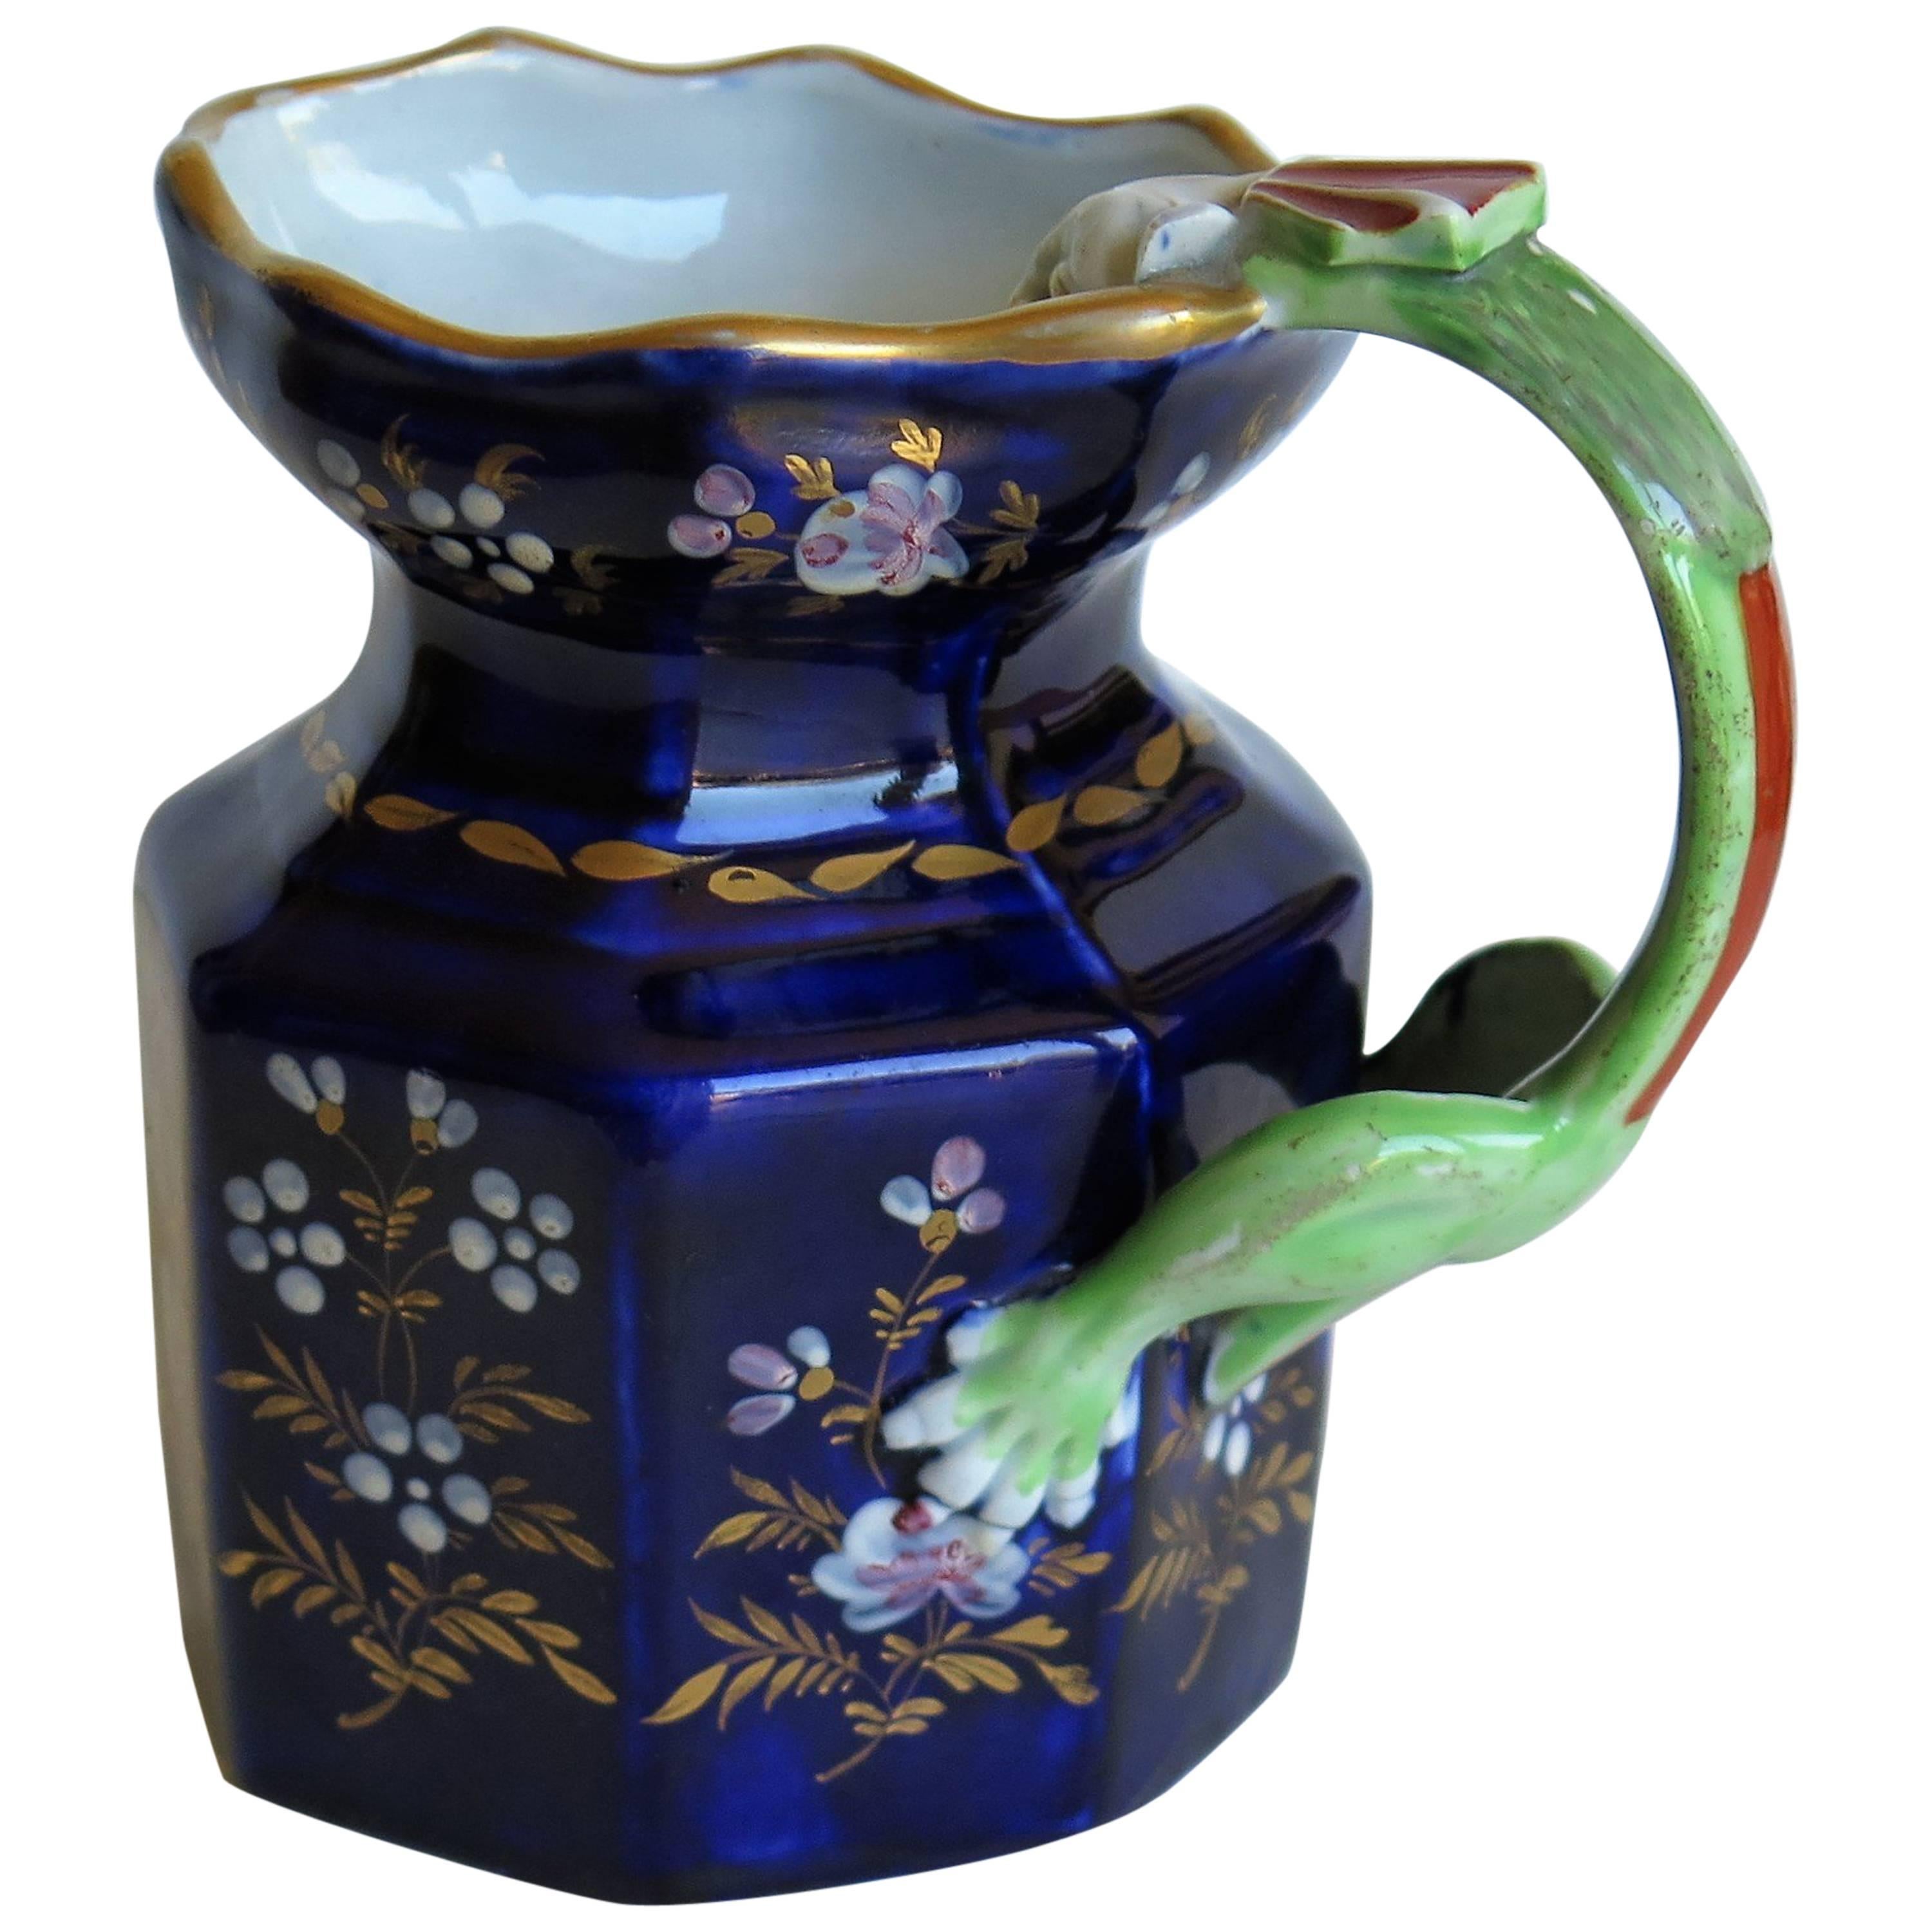  English Ironstone Jug with Dragon Handle Hand painted and Gilded, Ca 1820